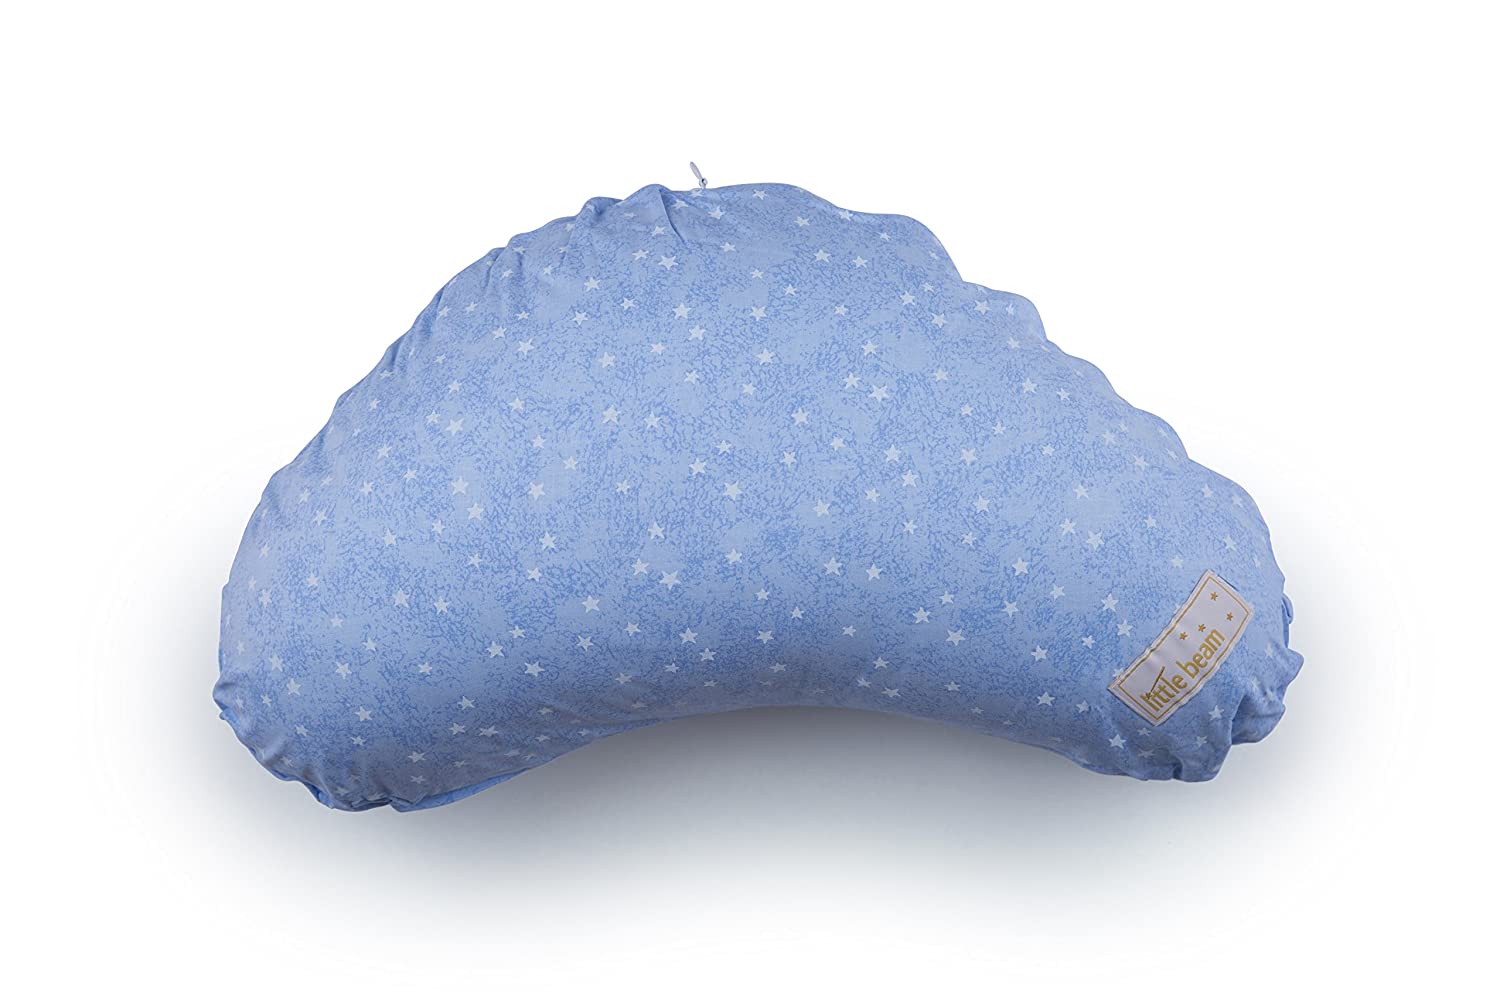 LittlebeamUS Nursing Cotton Cushion Pillow with Machine Washable Cover, Starry night